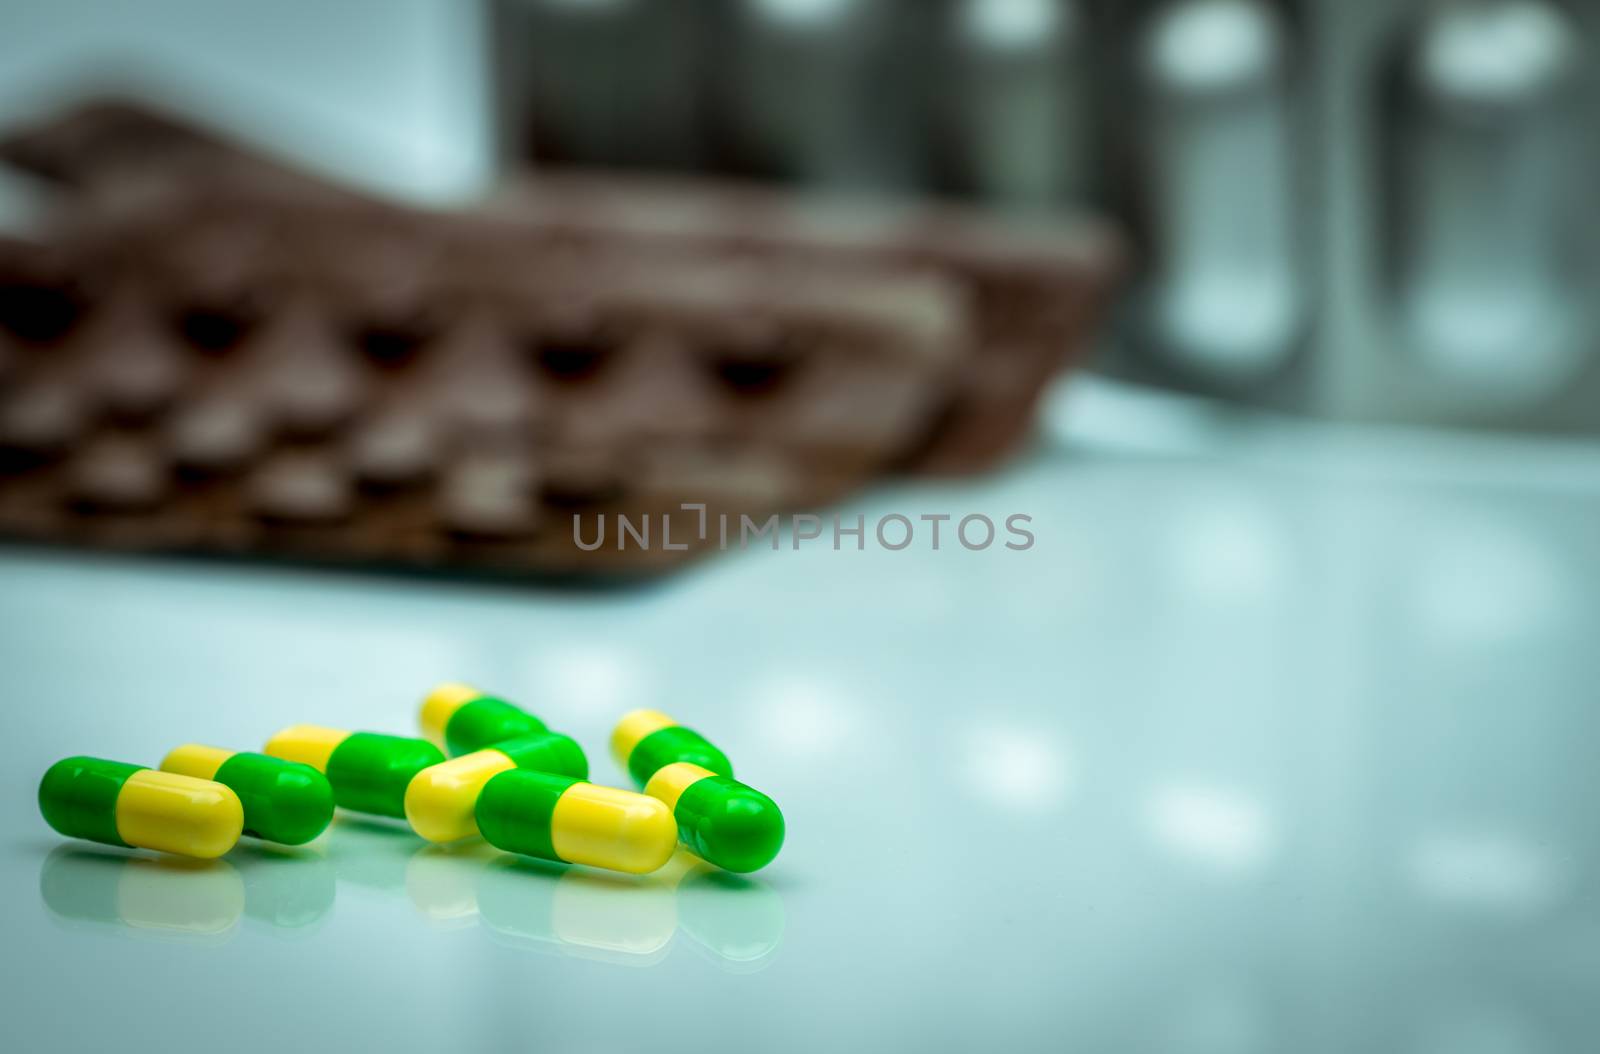 Green, yellow tramadol capsule pills on blurred blister pack background with copy space. Cancer pain management. Opioid analgesics. Drug abuse in teenage in Thailand. Pharmaceutical industry. Pharmacy background. Global healthcare concept.